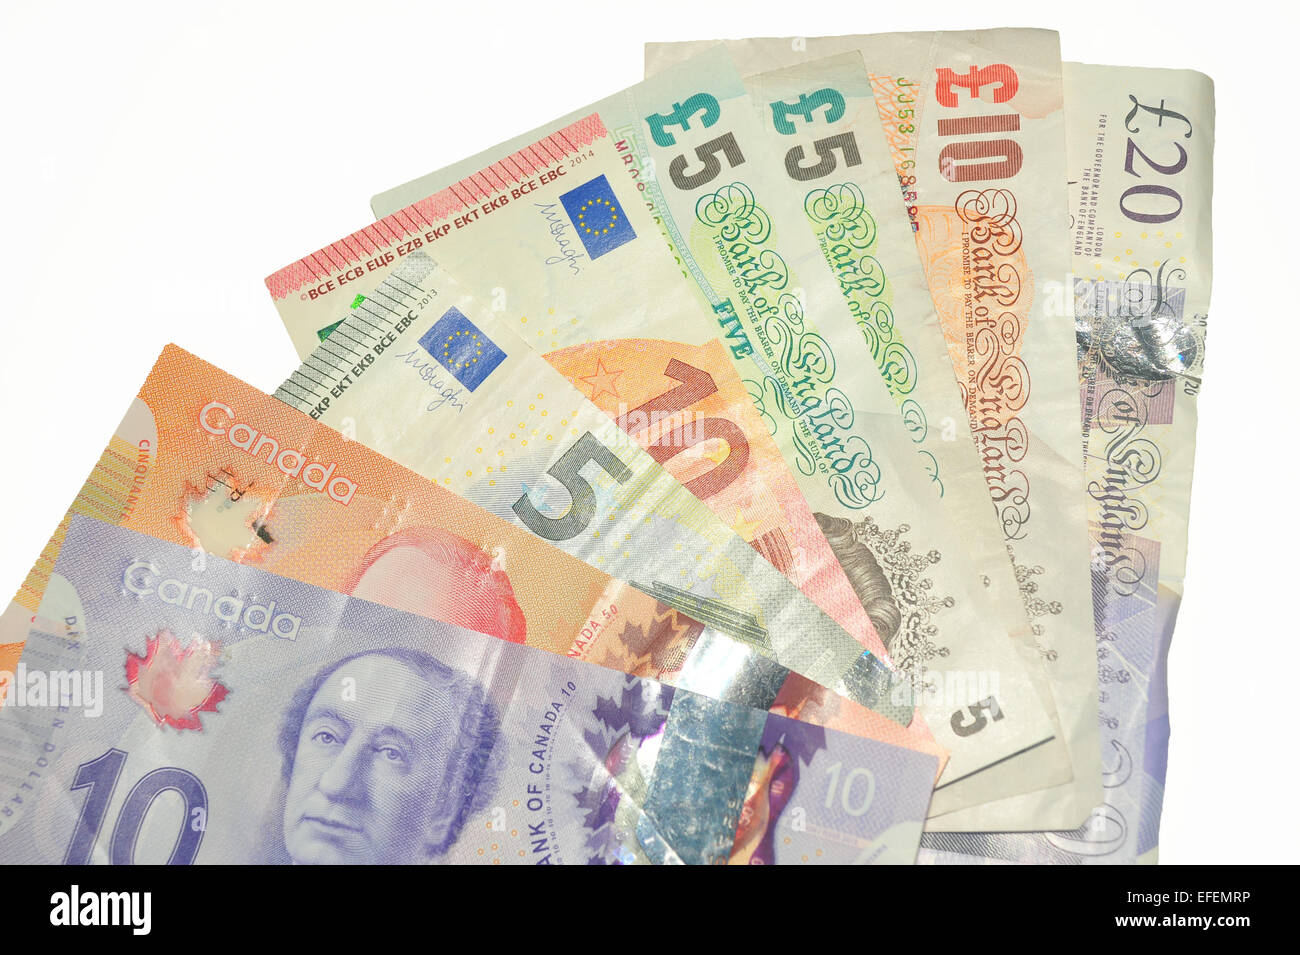 British Pound notes, Canadian Dollar notes and European Euro notes photographed against a white background. Stock Photo